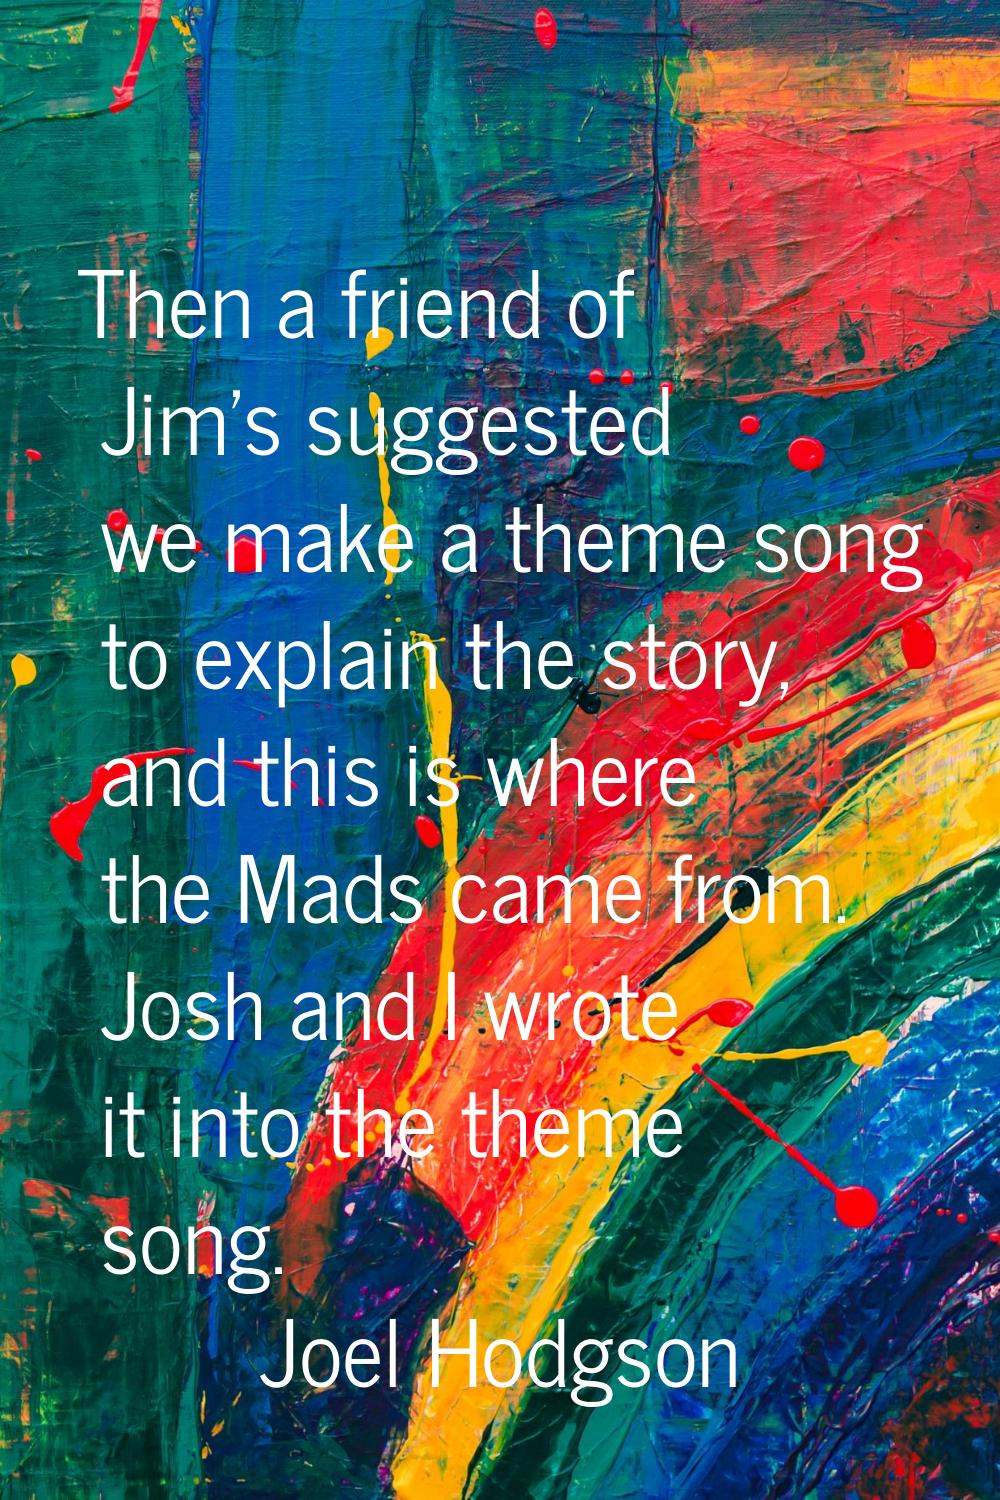 Then a friend of Jim's suggested we make a theme song to explain the story, and this is where the M